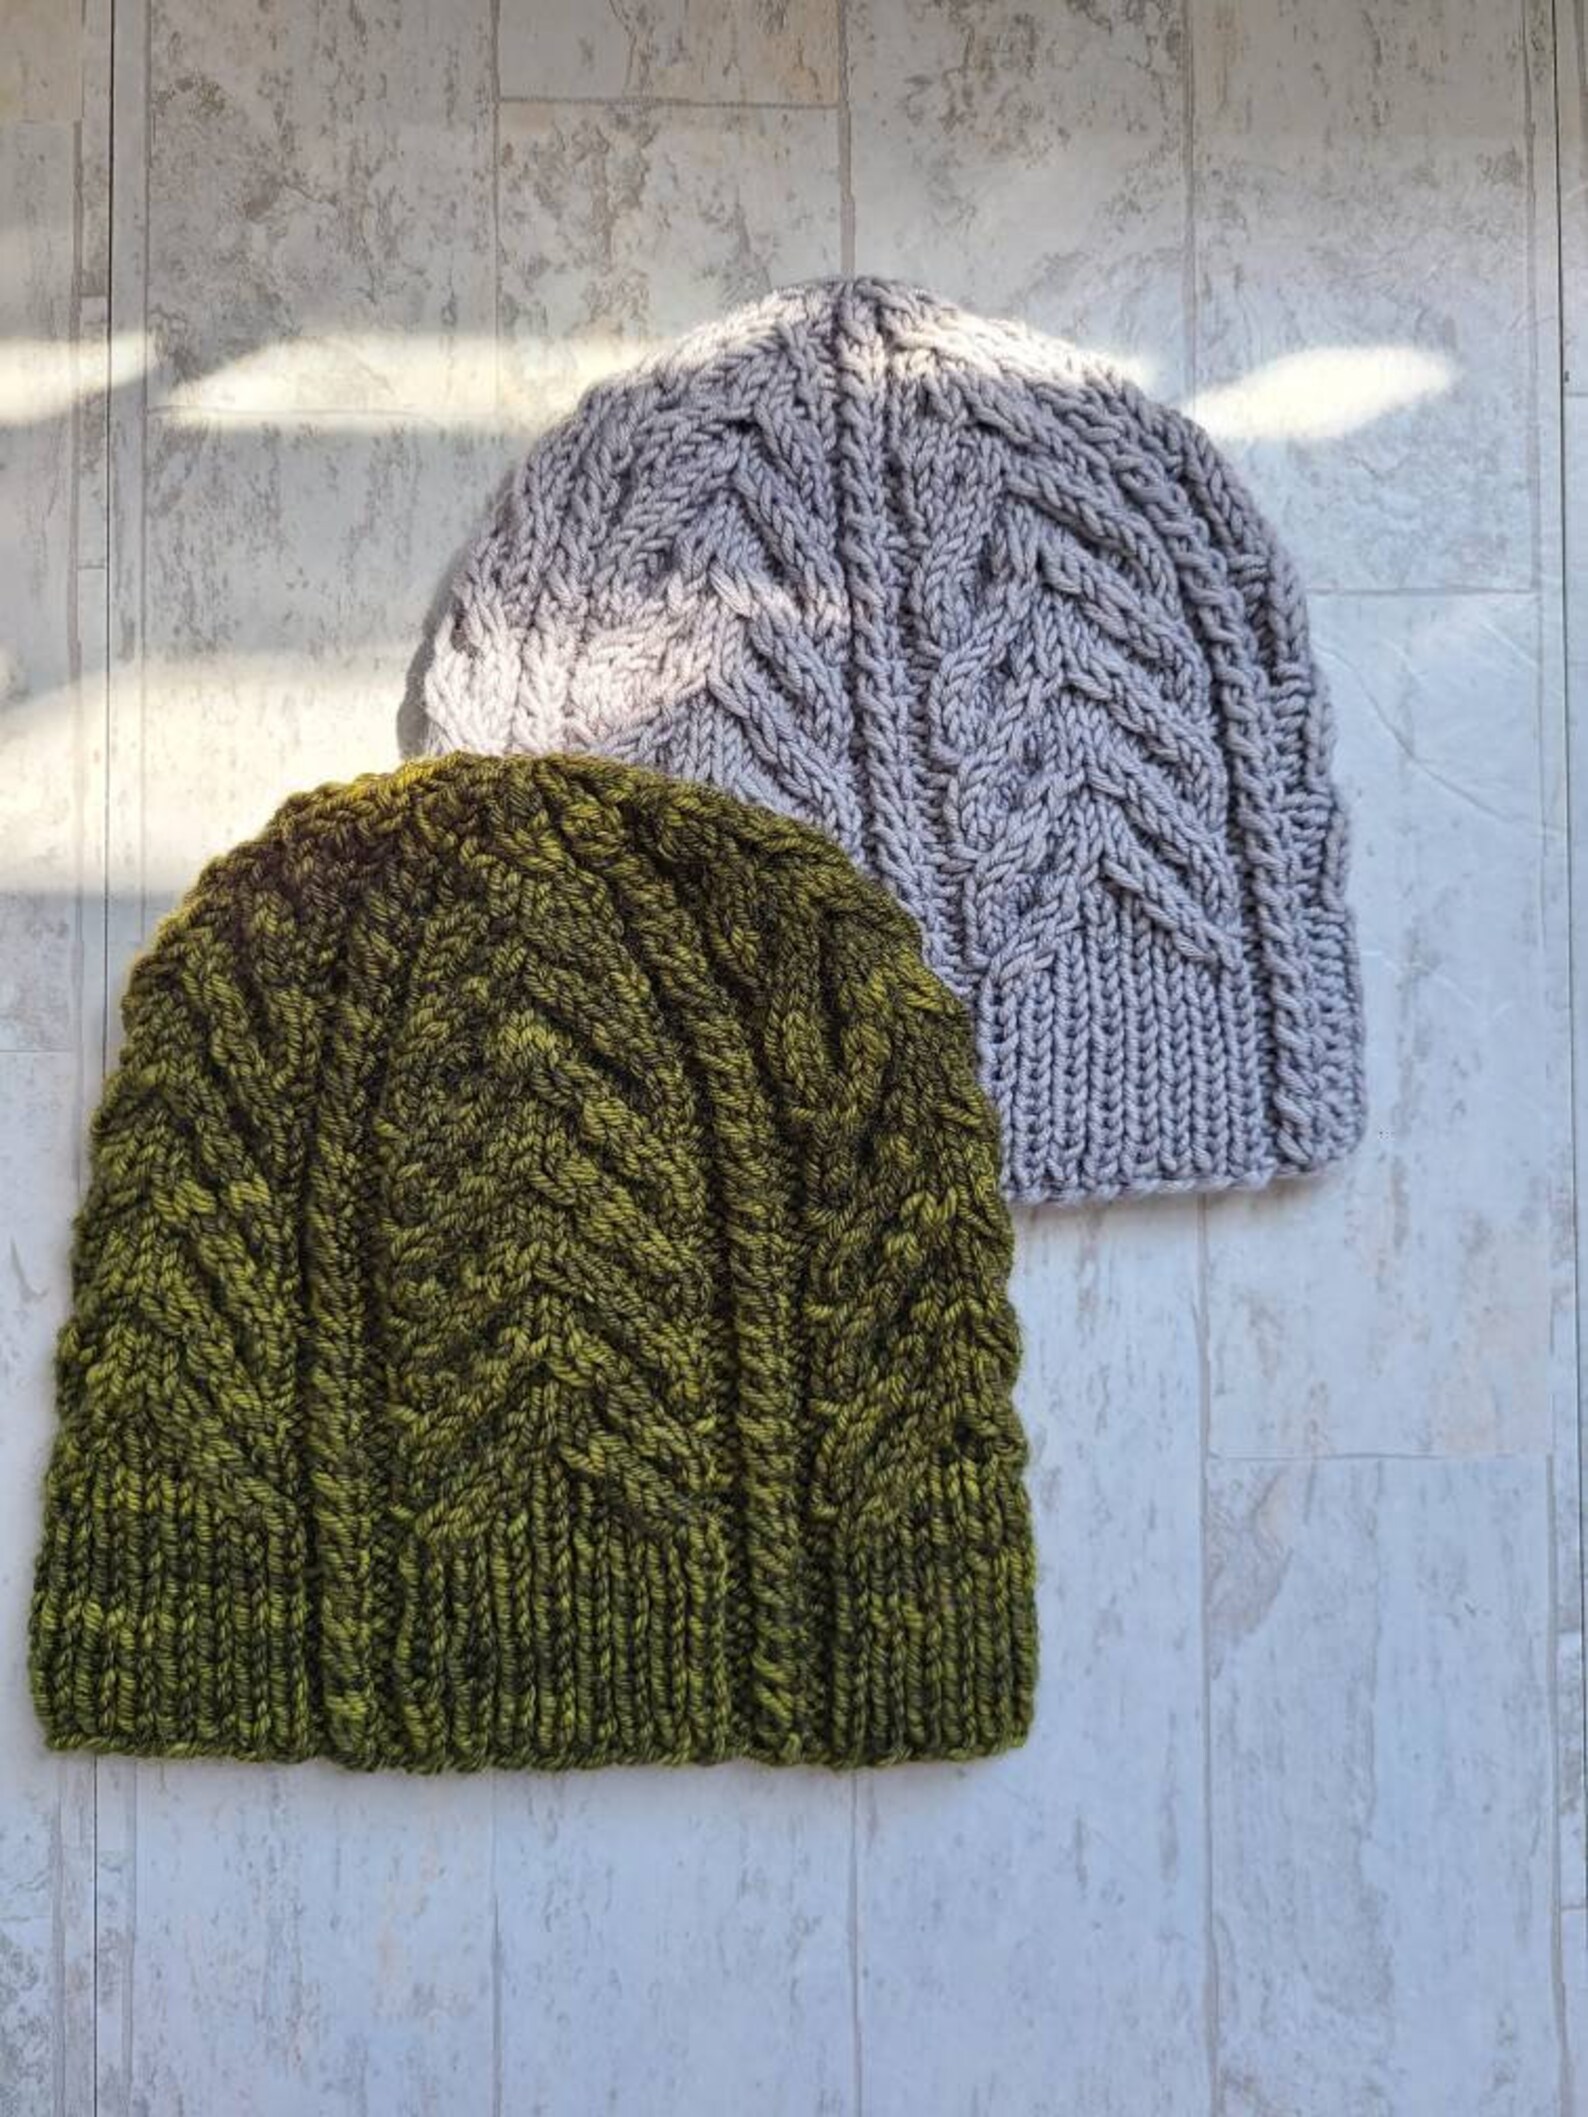 Otterbein Knitting Hat Pattern for Adult Sized Hat With - Etsy